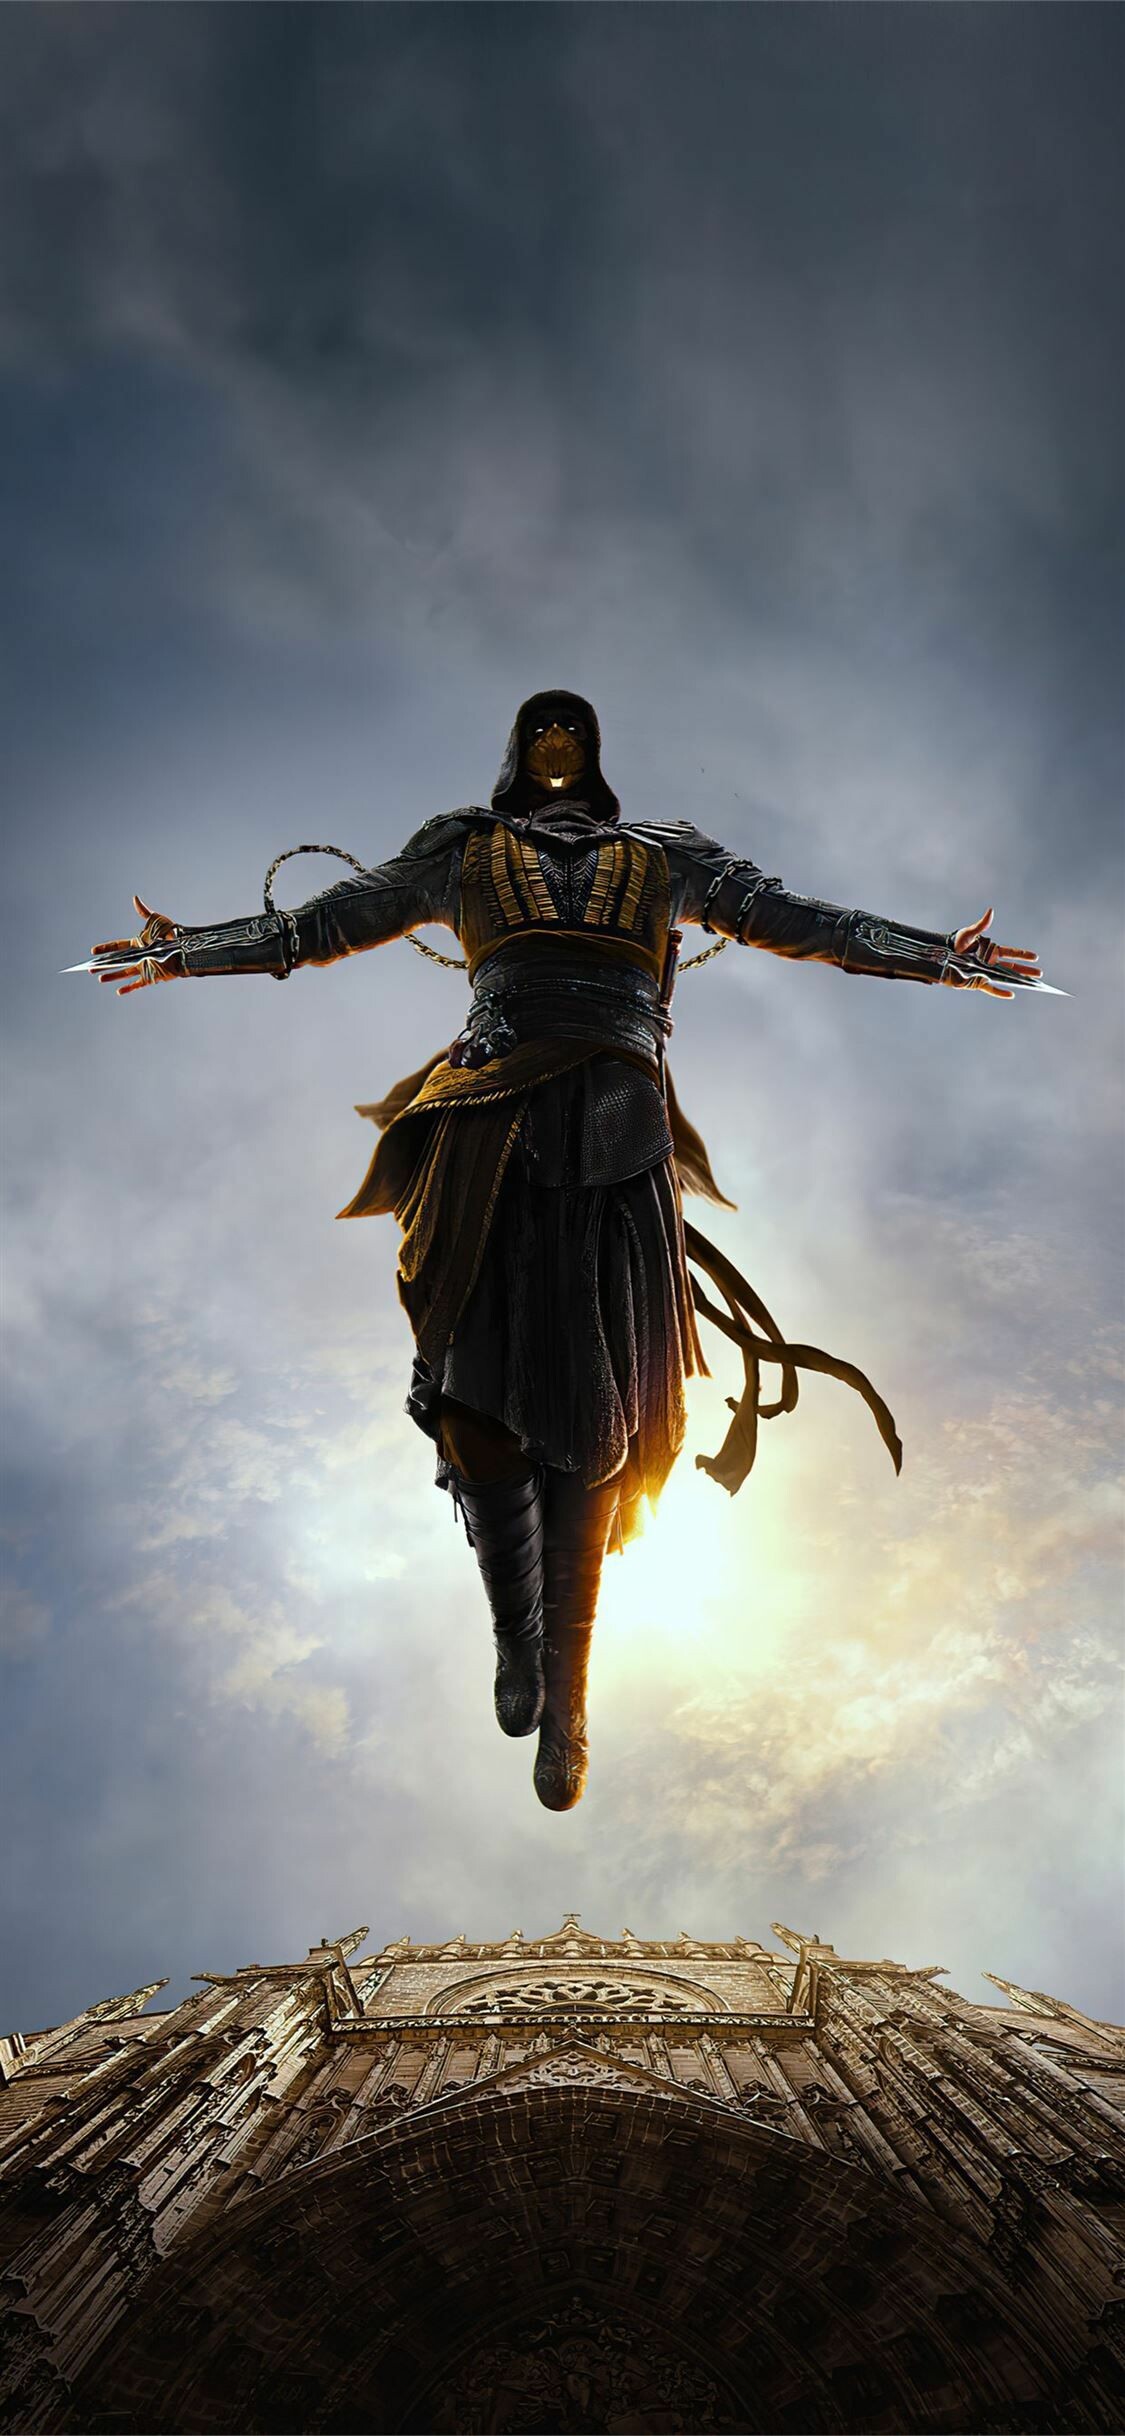 Assassin's Creed: Video game franchise using the game engine Anvil. 1130x2440 HD Background.